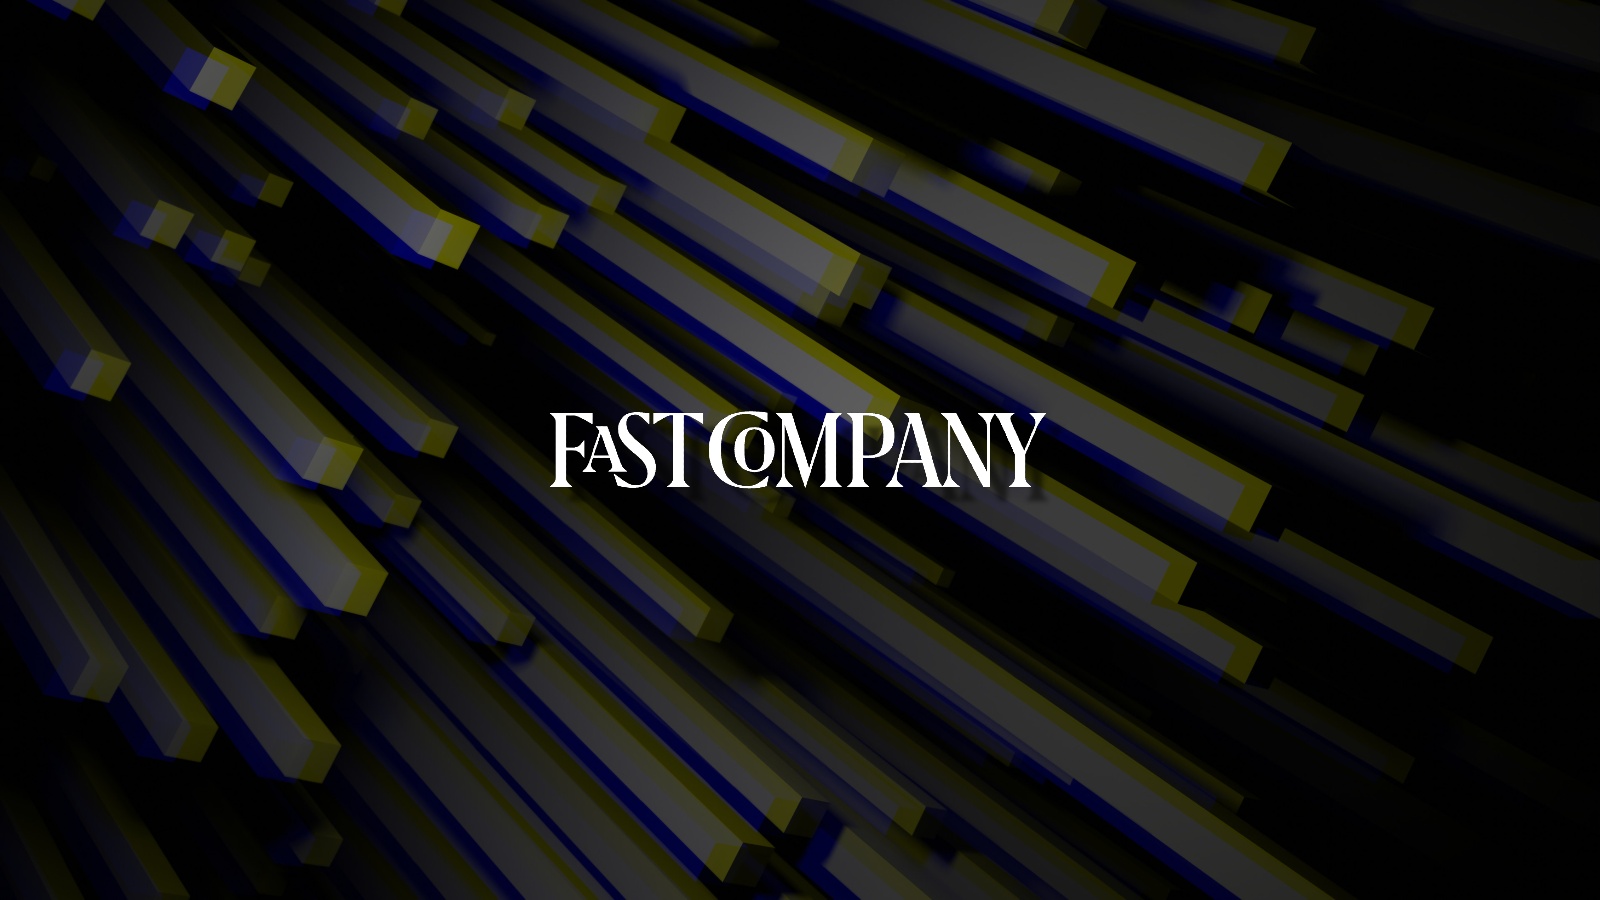 Fast Company says Executive Board member info was not stolen in attack